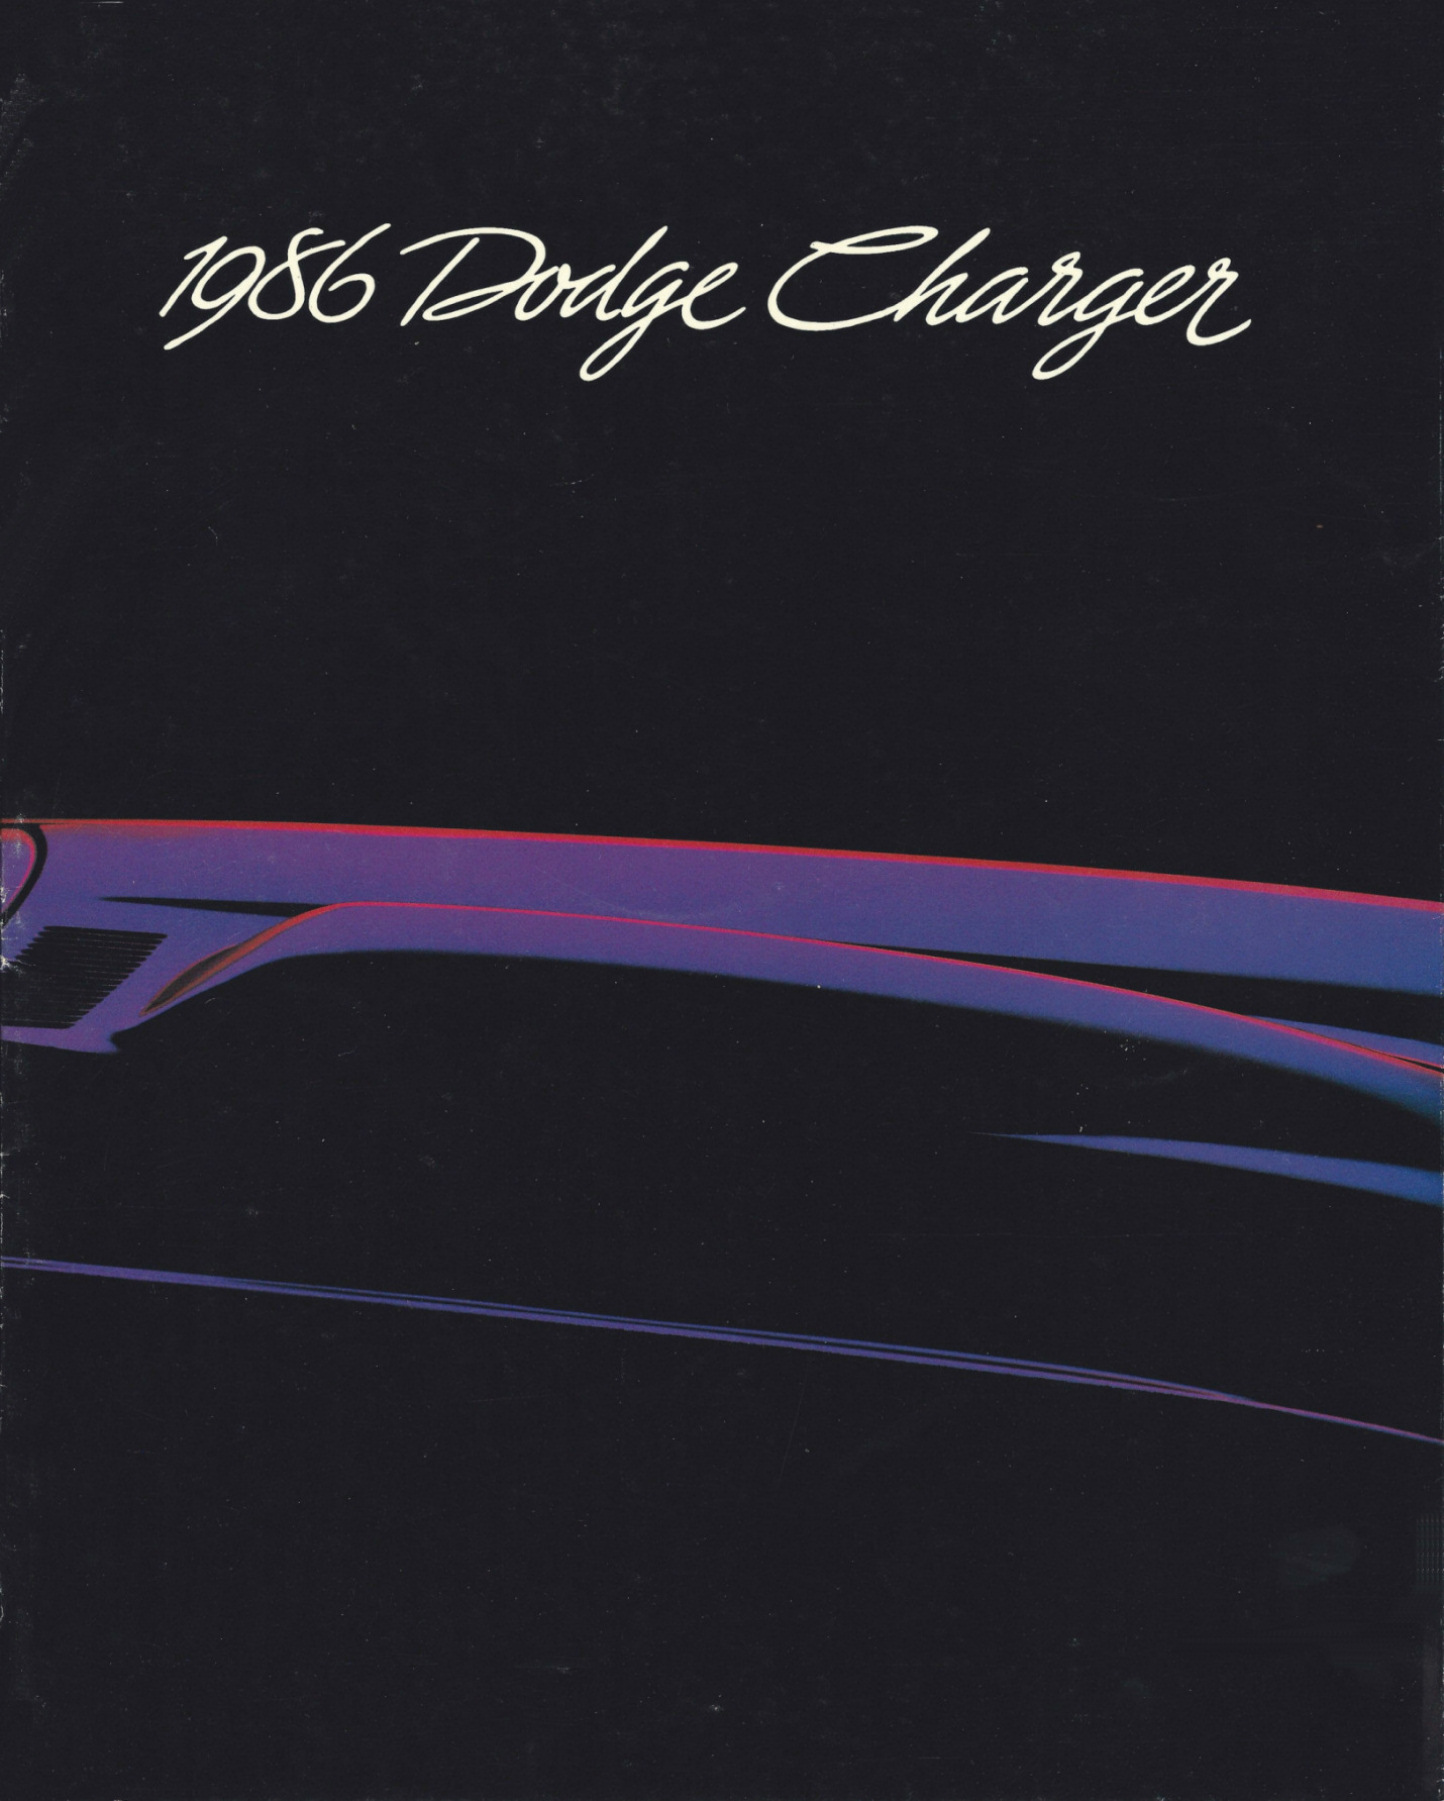 1986_Dodge_Charger-01